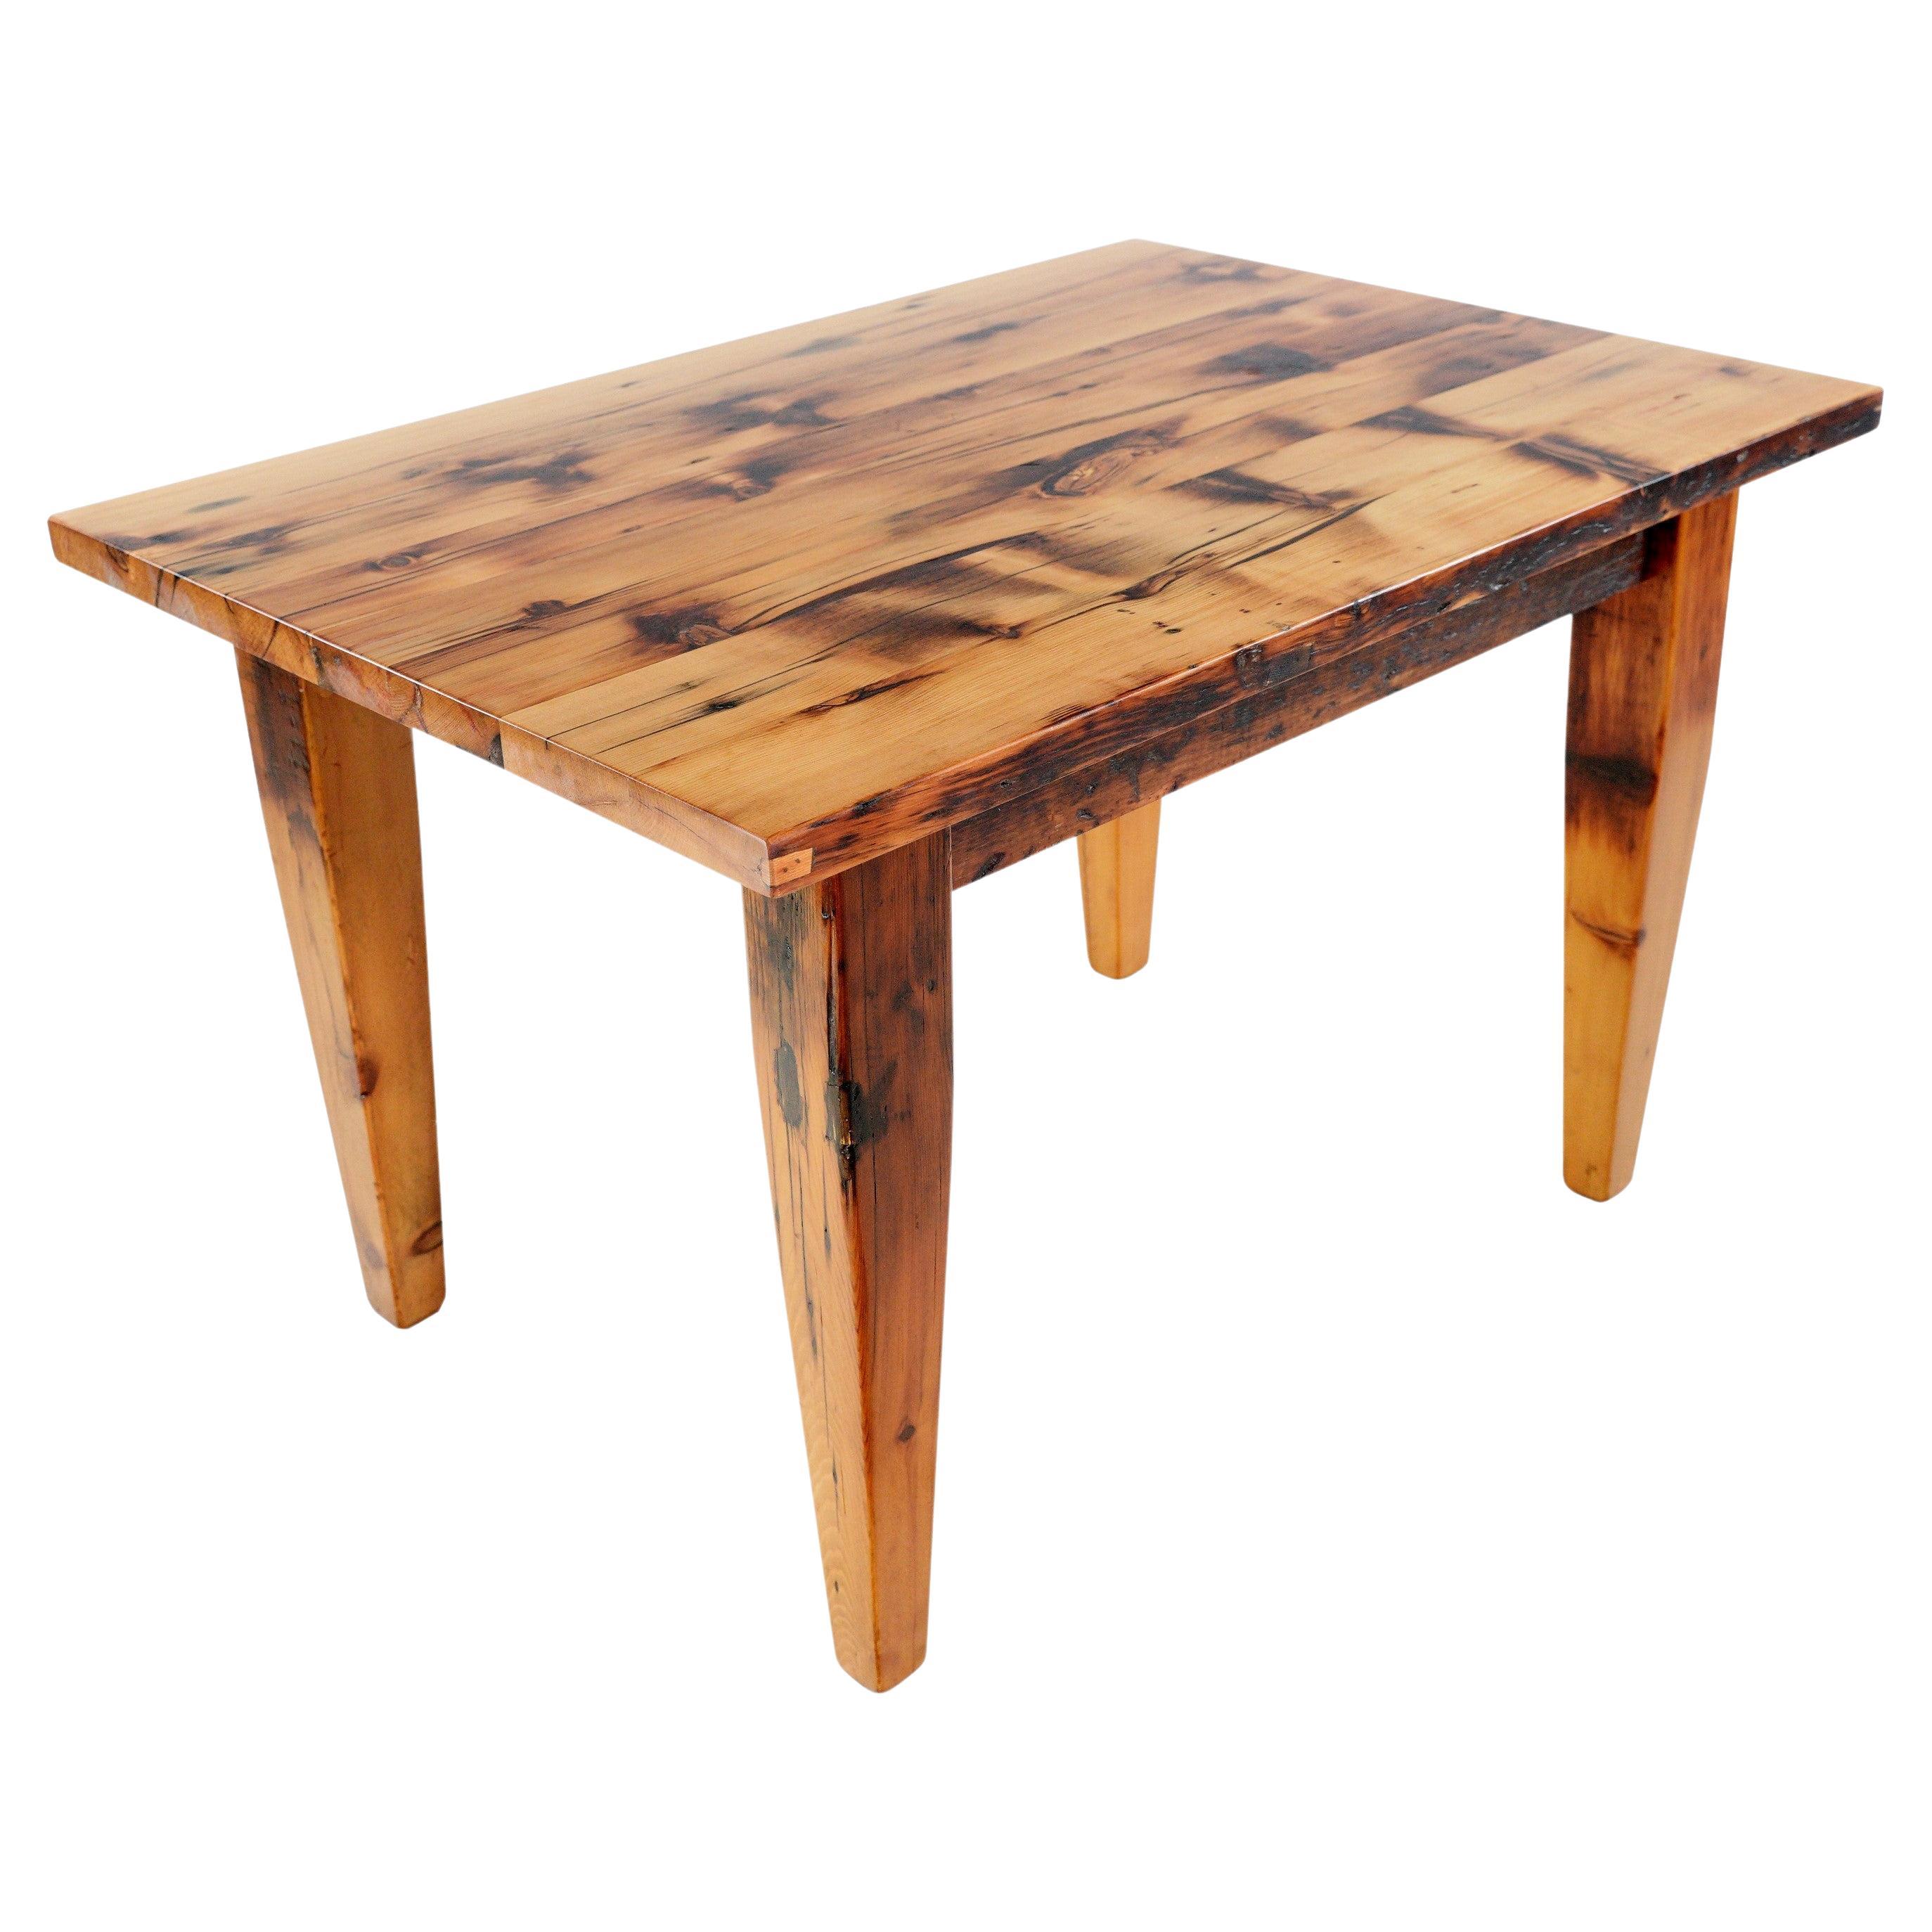 Rustic 7 ft Pine Tapered Leg Farm Harvest Table For Sale at 1stDibs